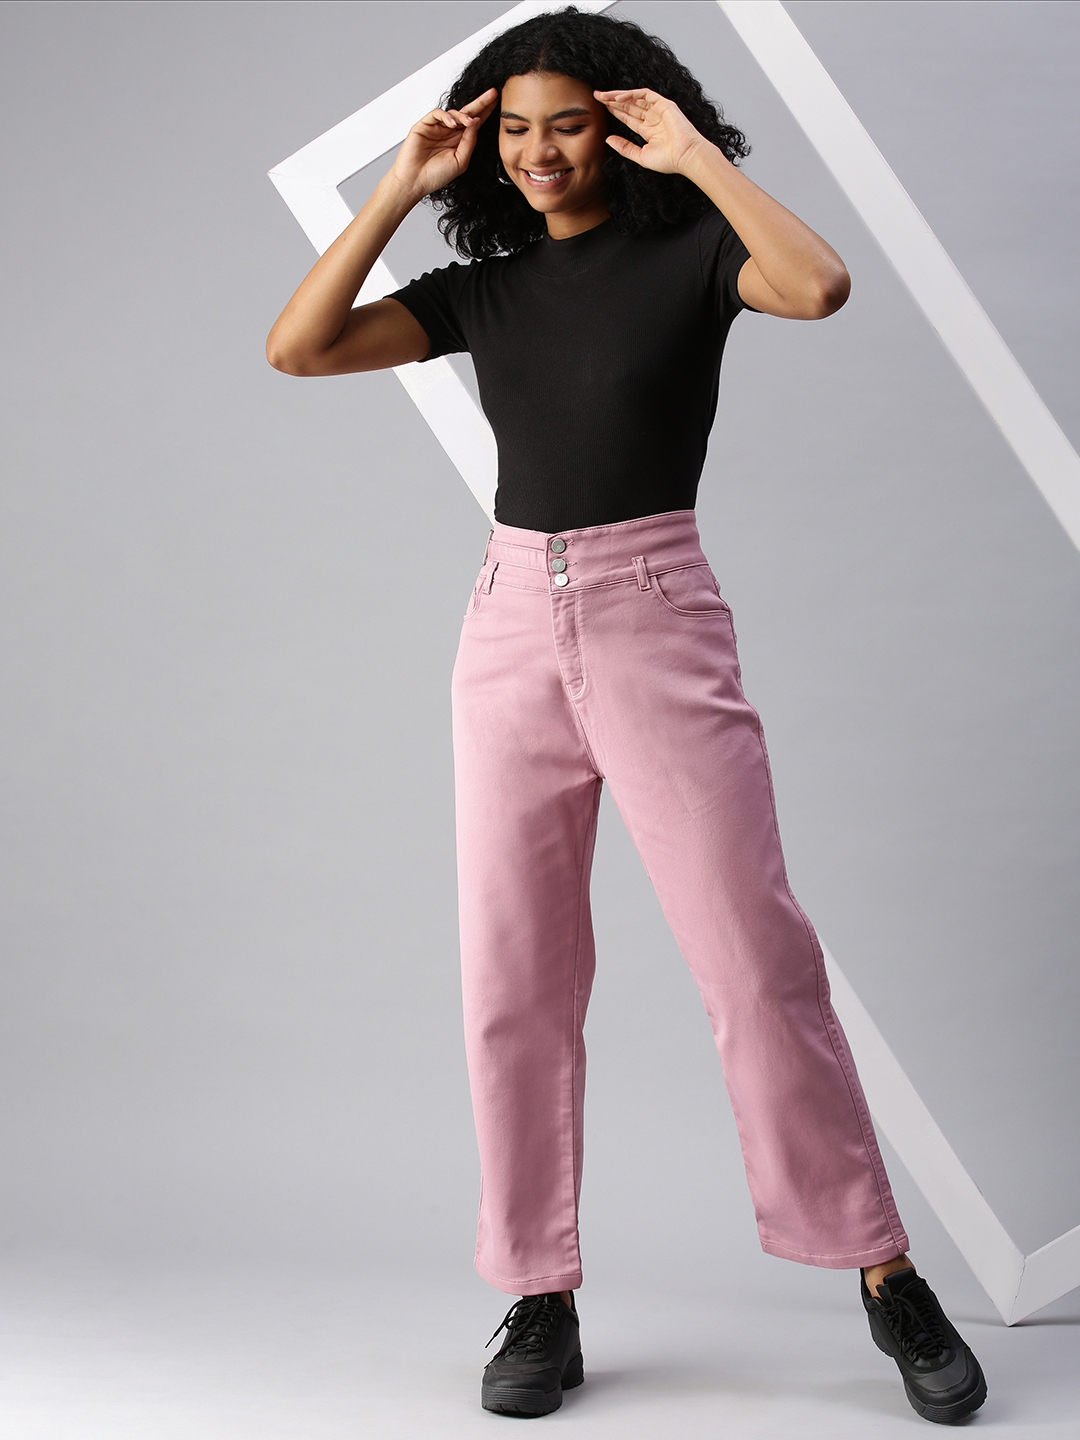 Showoff | SHOWOFF Women's Clean Look Pink Relaxed Fit Denim Jeans 3